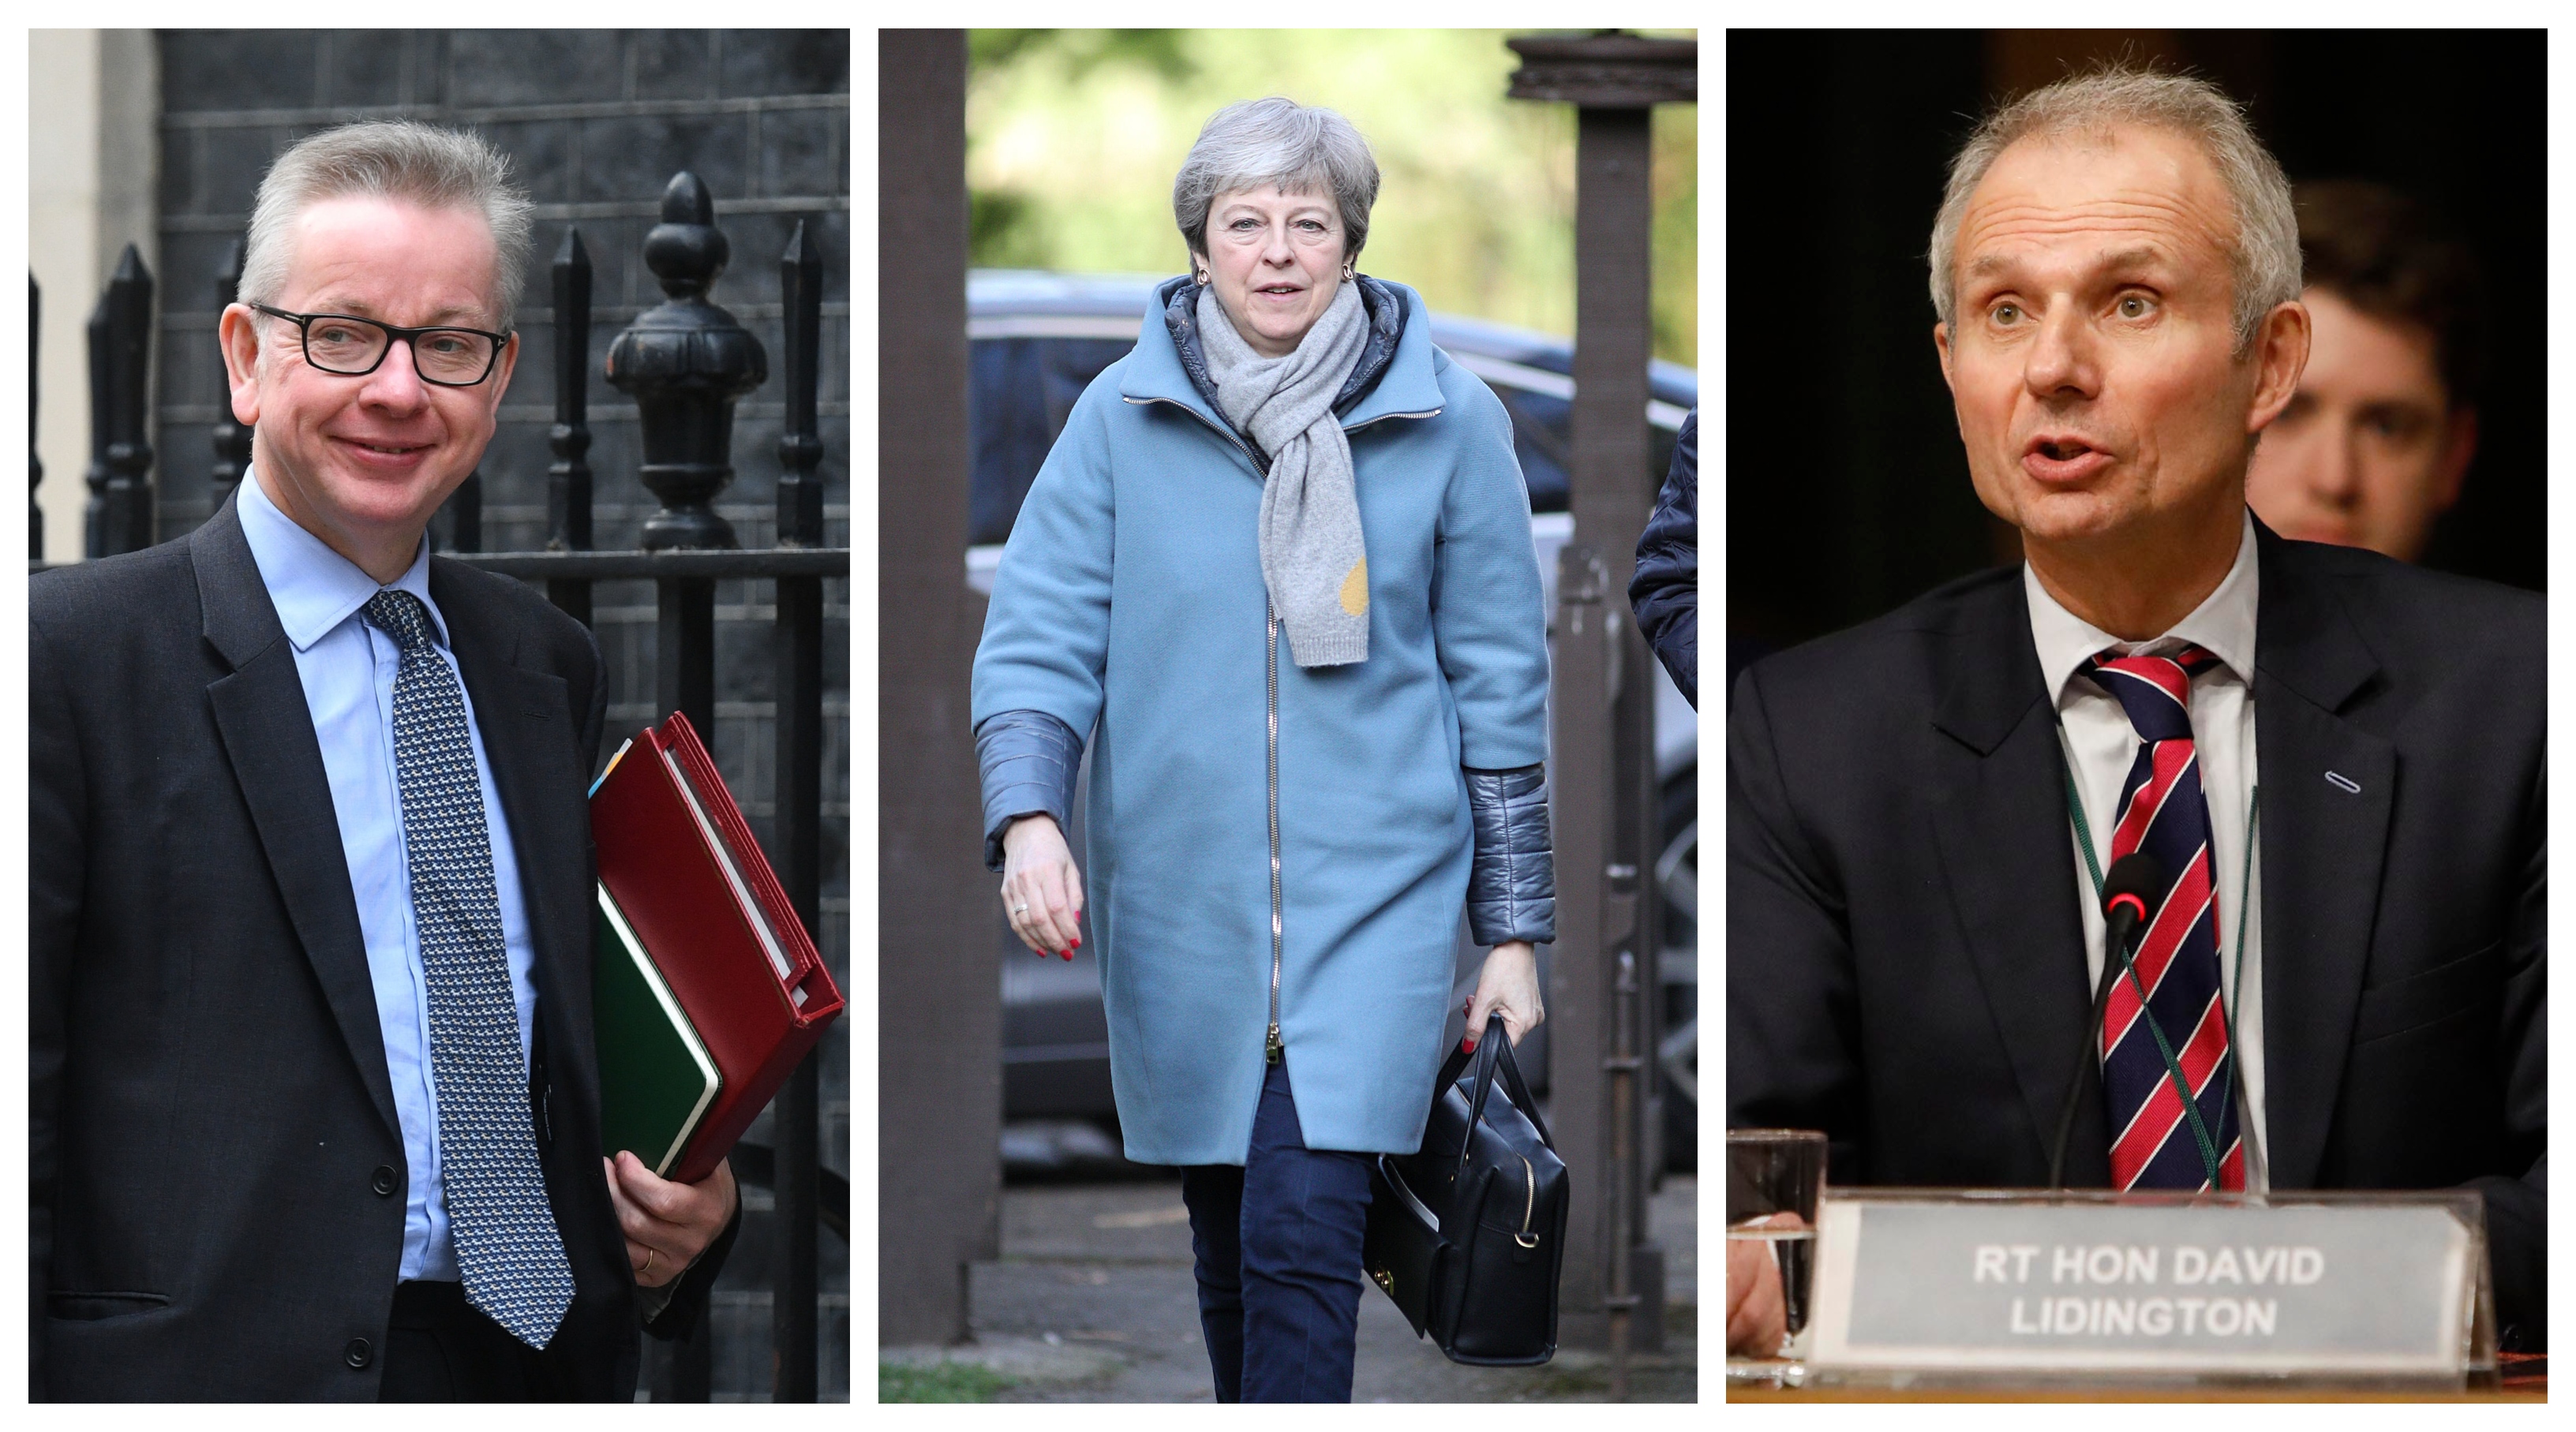 Stuck in the middle with you: Michael Gove and David Lidington both restated their backing for the Prime Minister